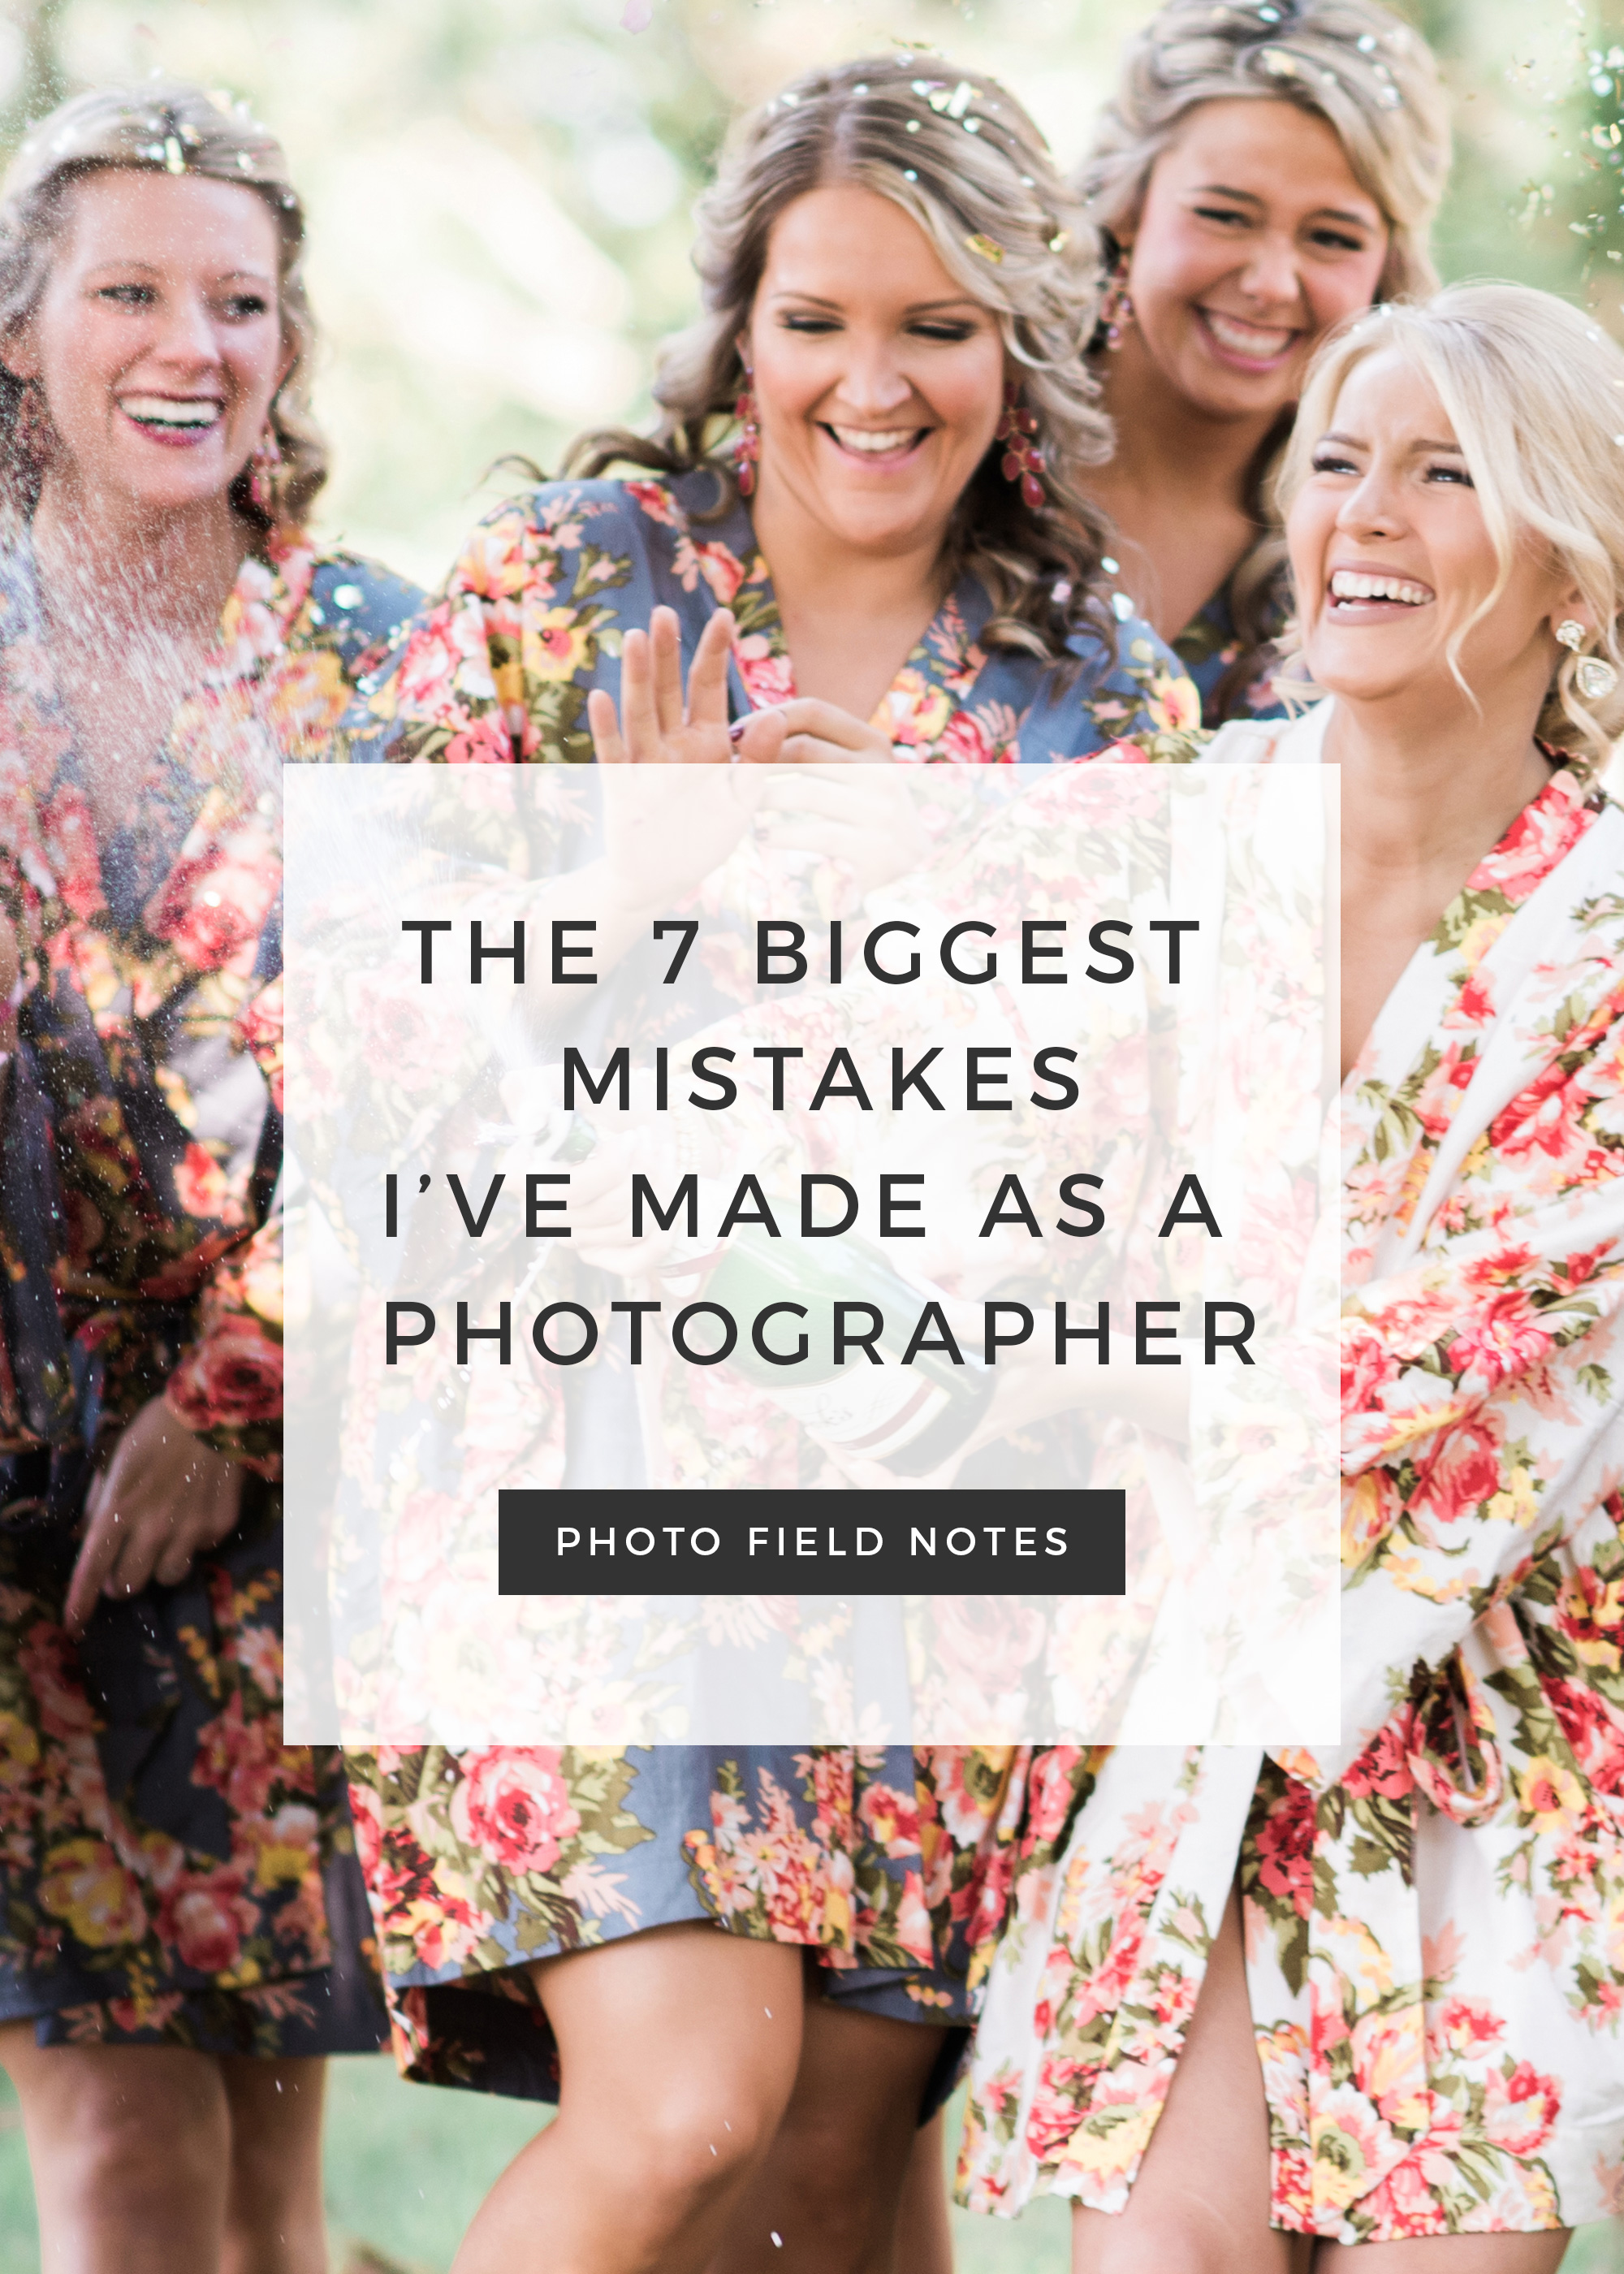 The 7 Biggest Mistakes I've Made as a Photographer